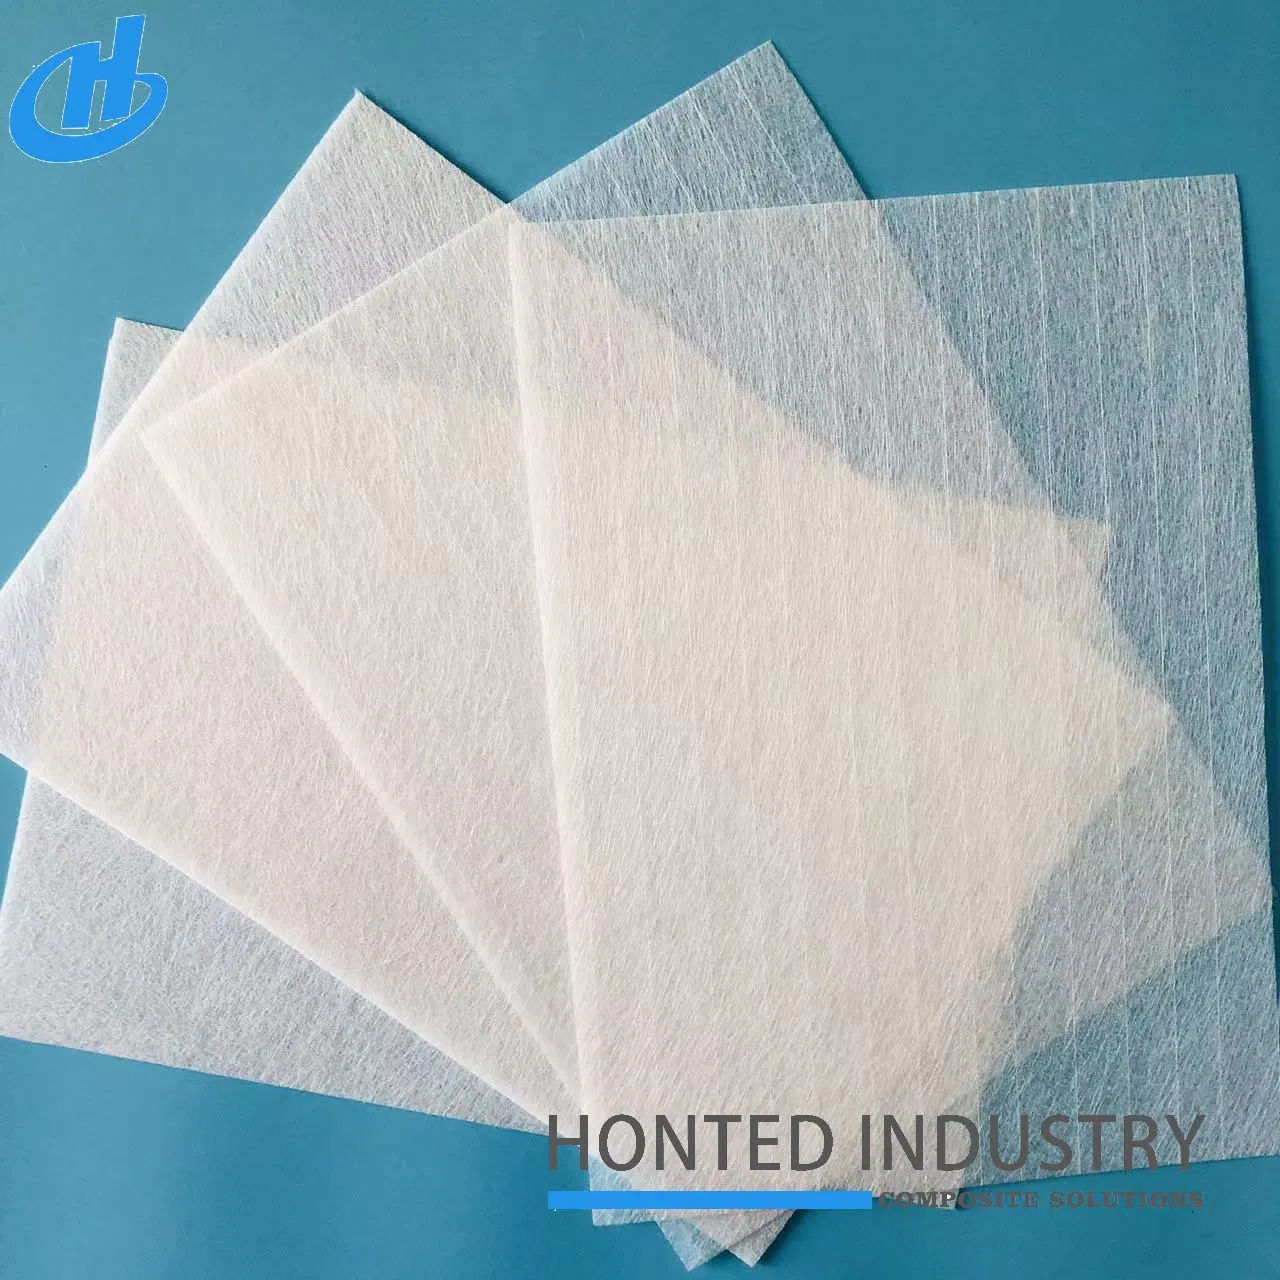 30g- 100g Fiberglass Surface Tissue / Roofing Tissue for FRP Products / Thermal Insulation, Fire Retardant, Epoxy Coated Sheet